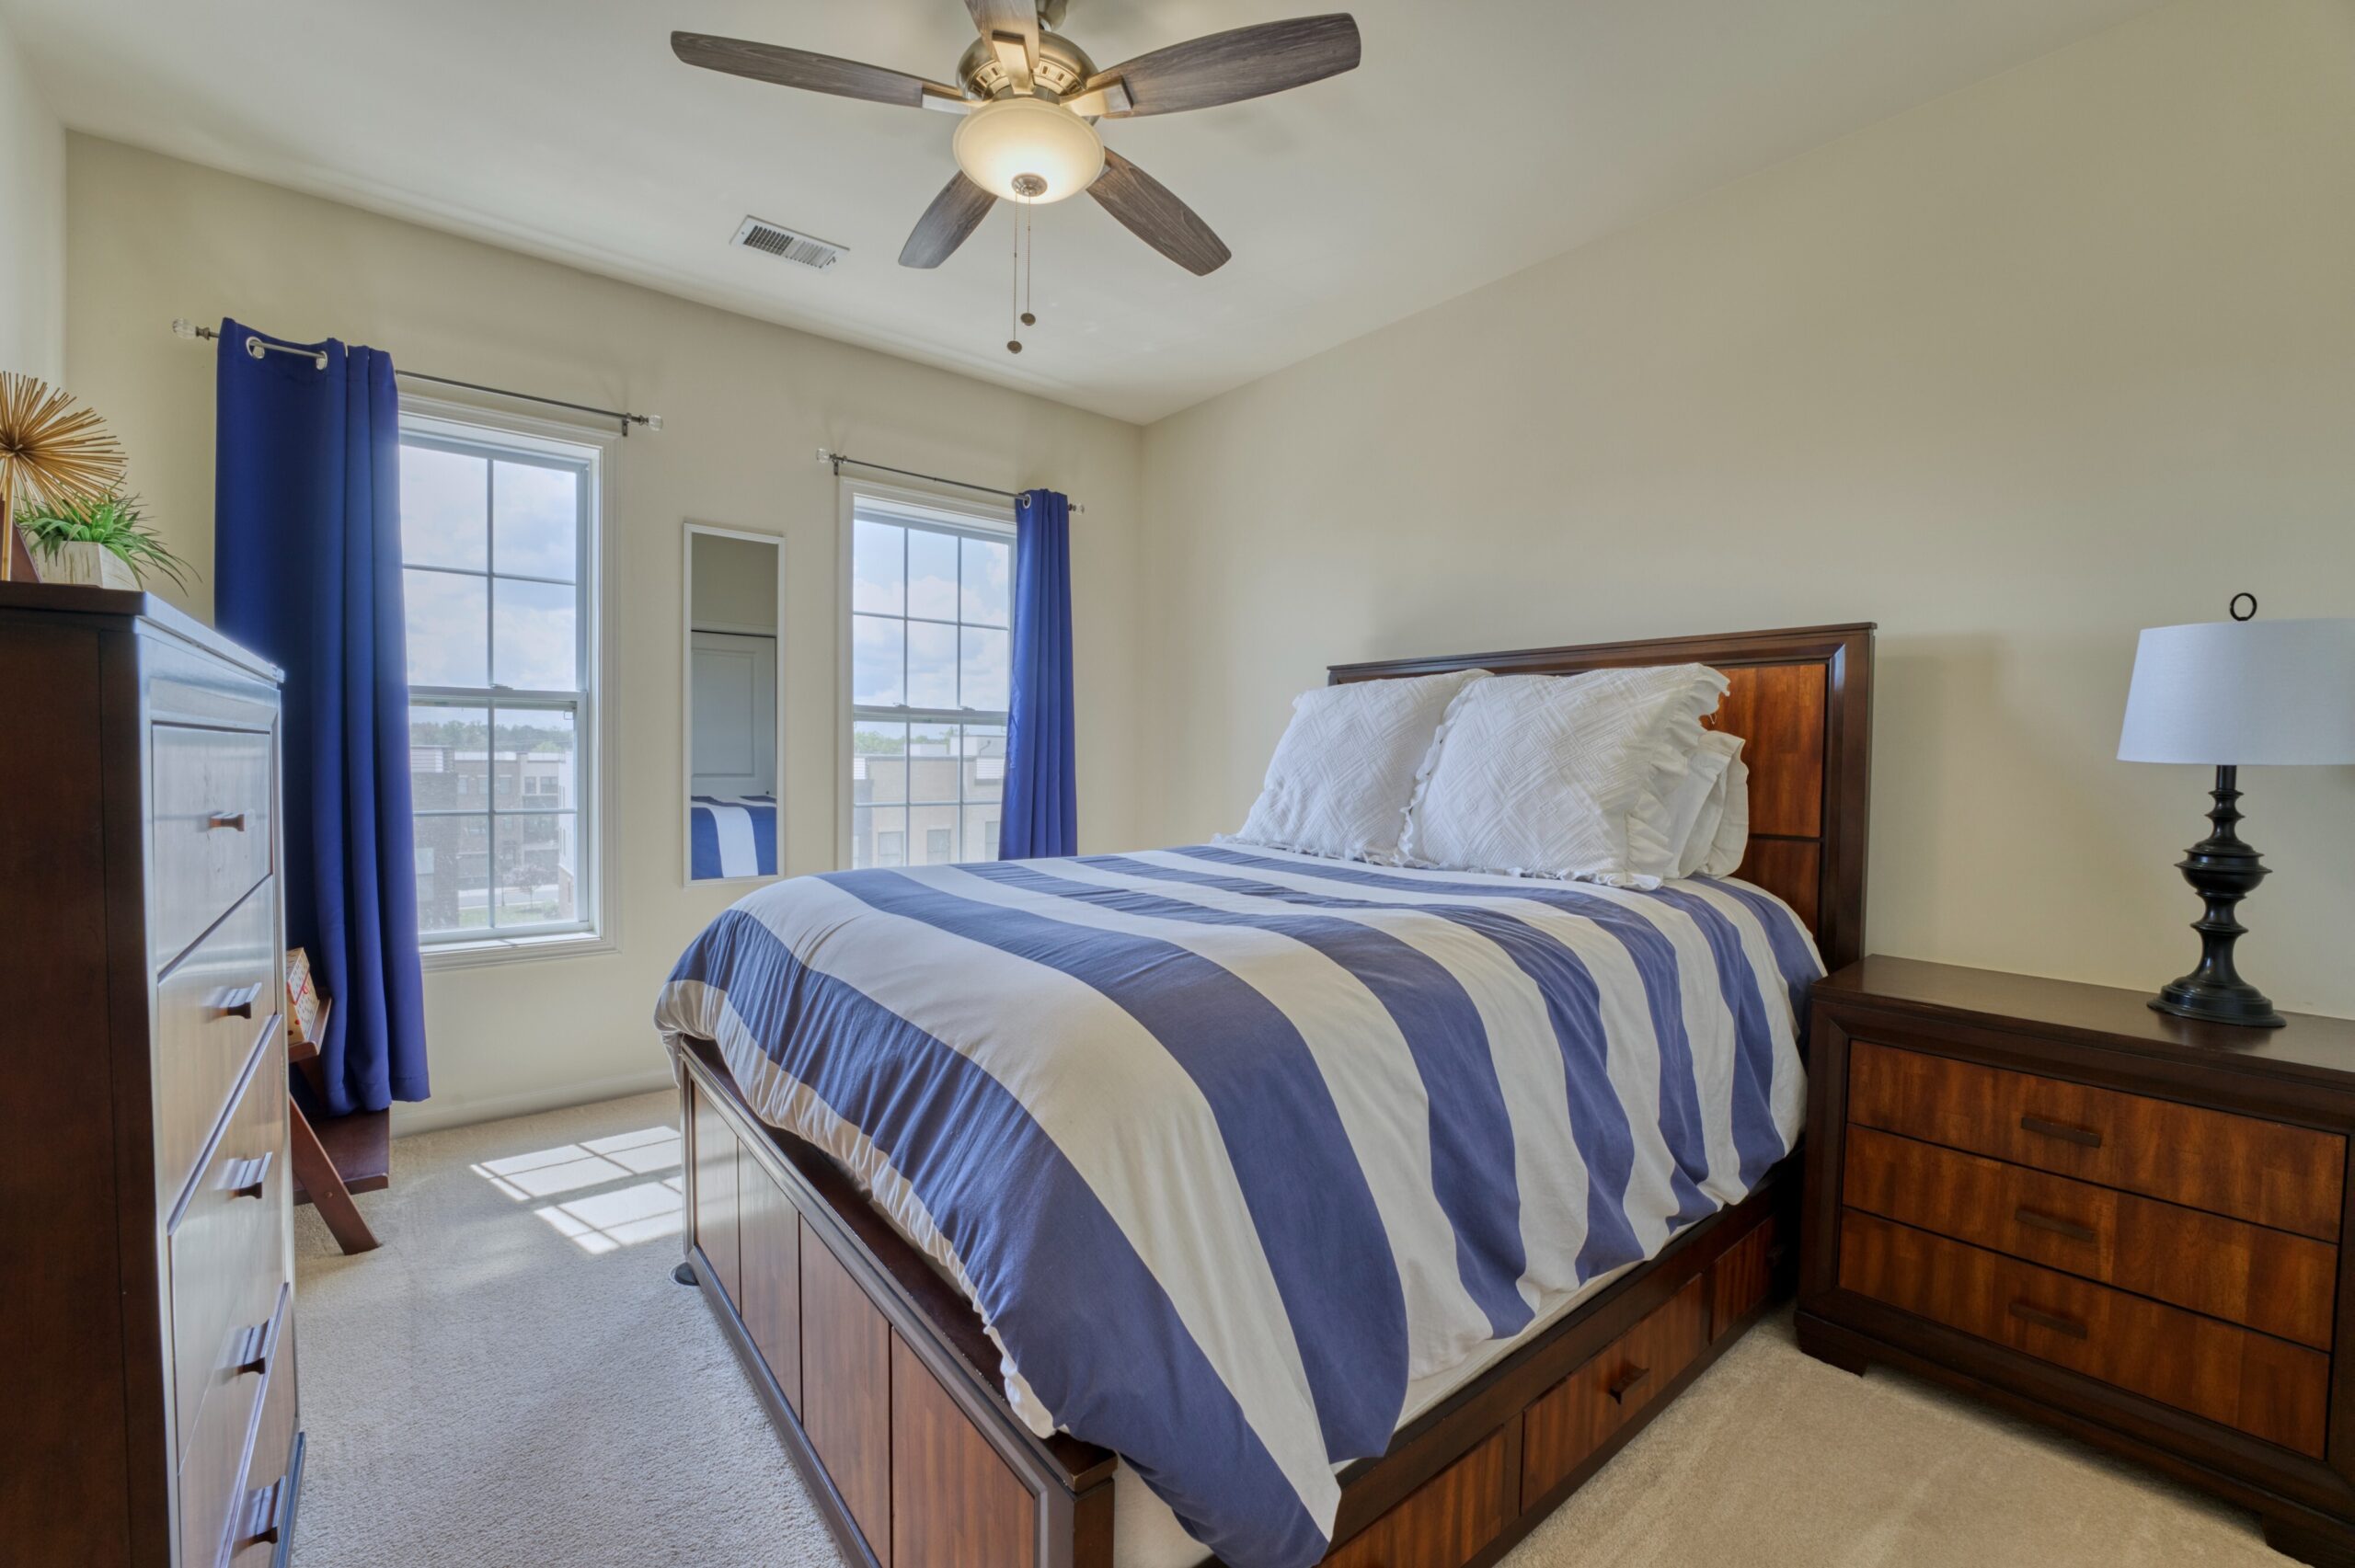 Professional interior photo of 23560 Buckland Farm Ter, Ashburn, VA - Showing the secondary bedroom with 2 large windows and ceiling fan